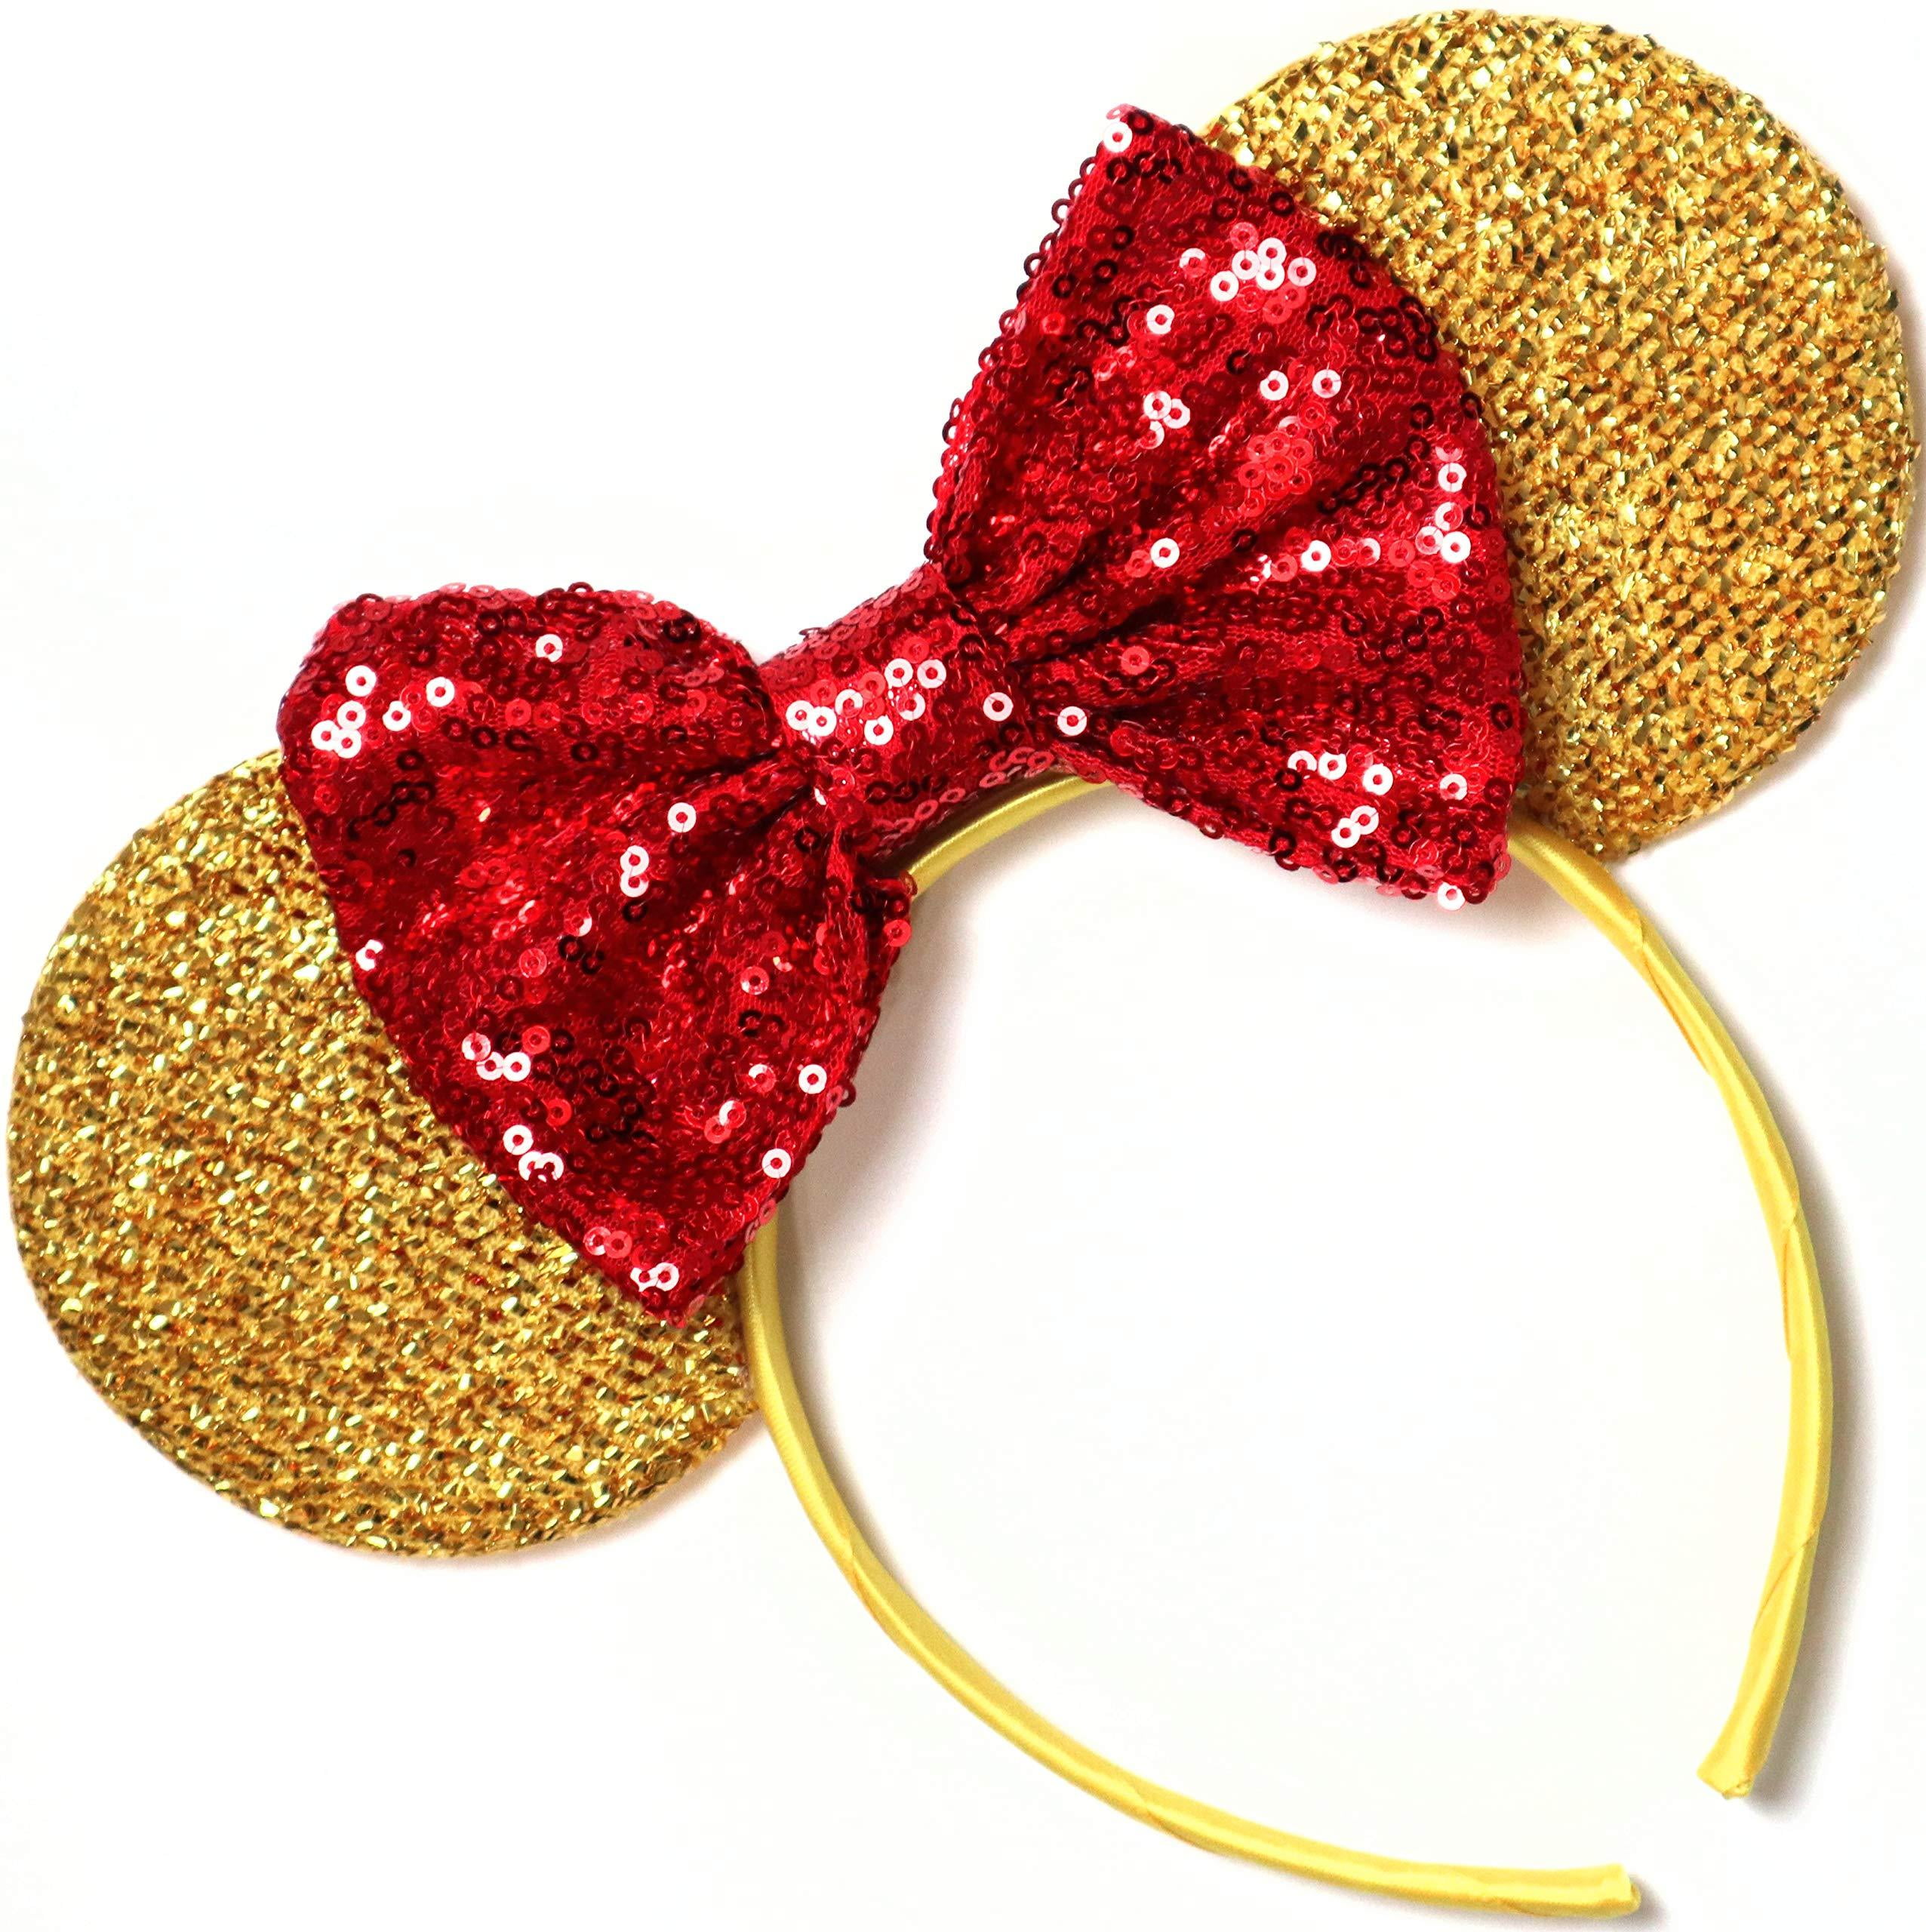 Belle Ears,Belle Mouse Ears,Mouse Ears,Belle,Beauty and the Beast,Minnie Mouse Ears,Mickey Mouse Ears,Minnie Ears,Mickey Ears,Gift,Handmade